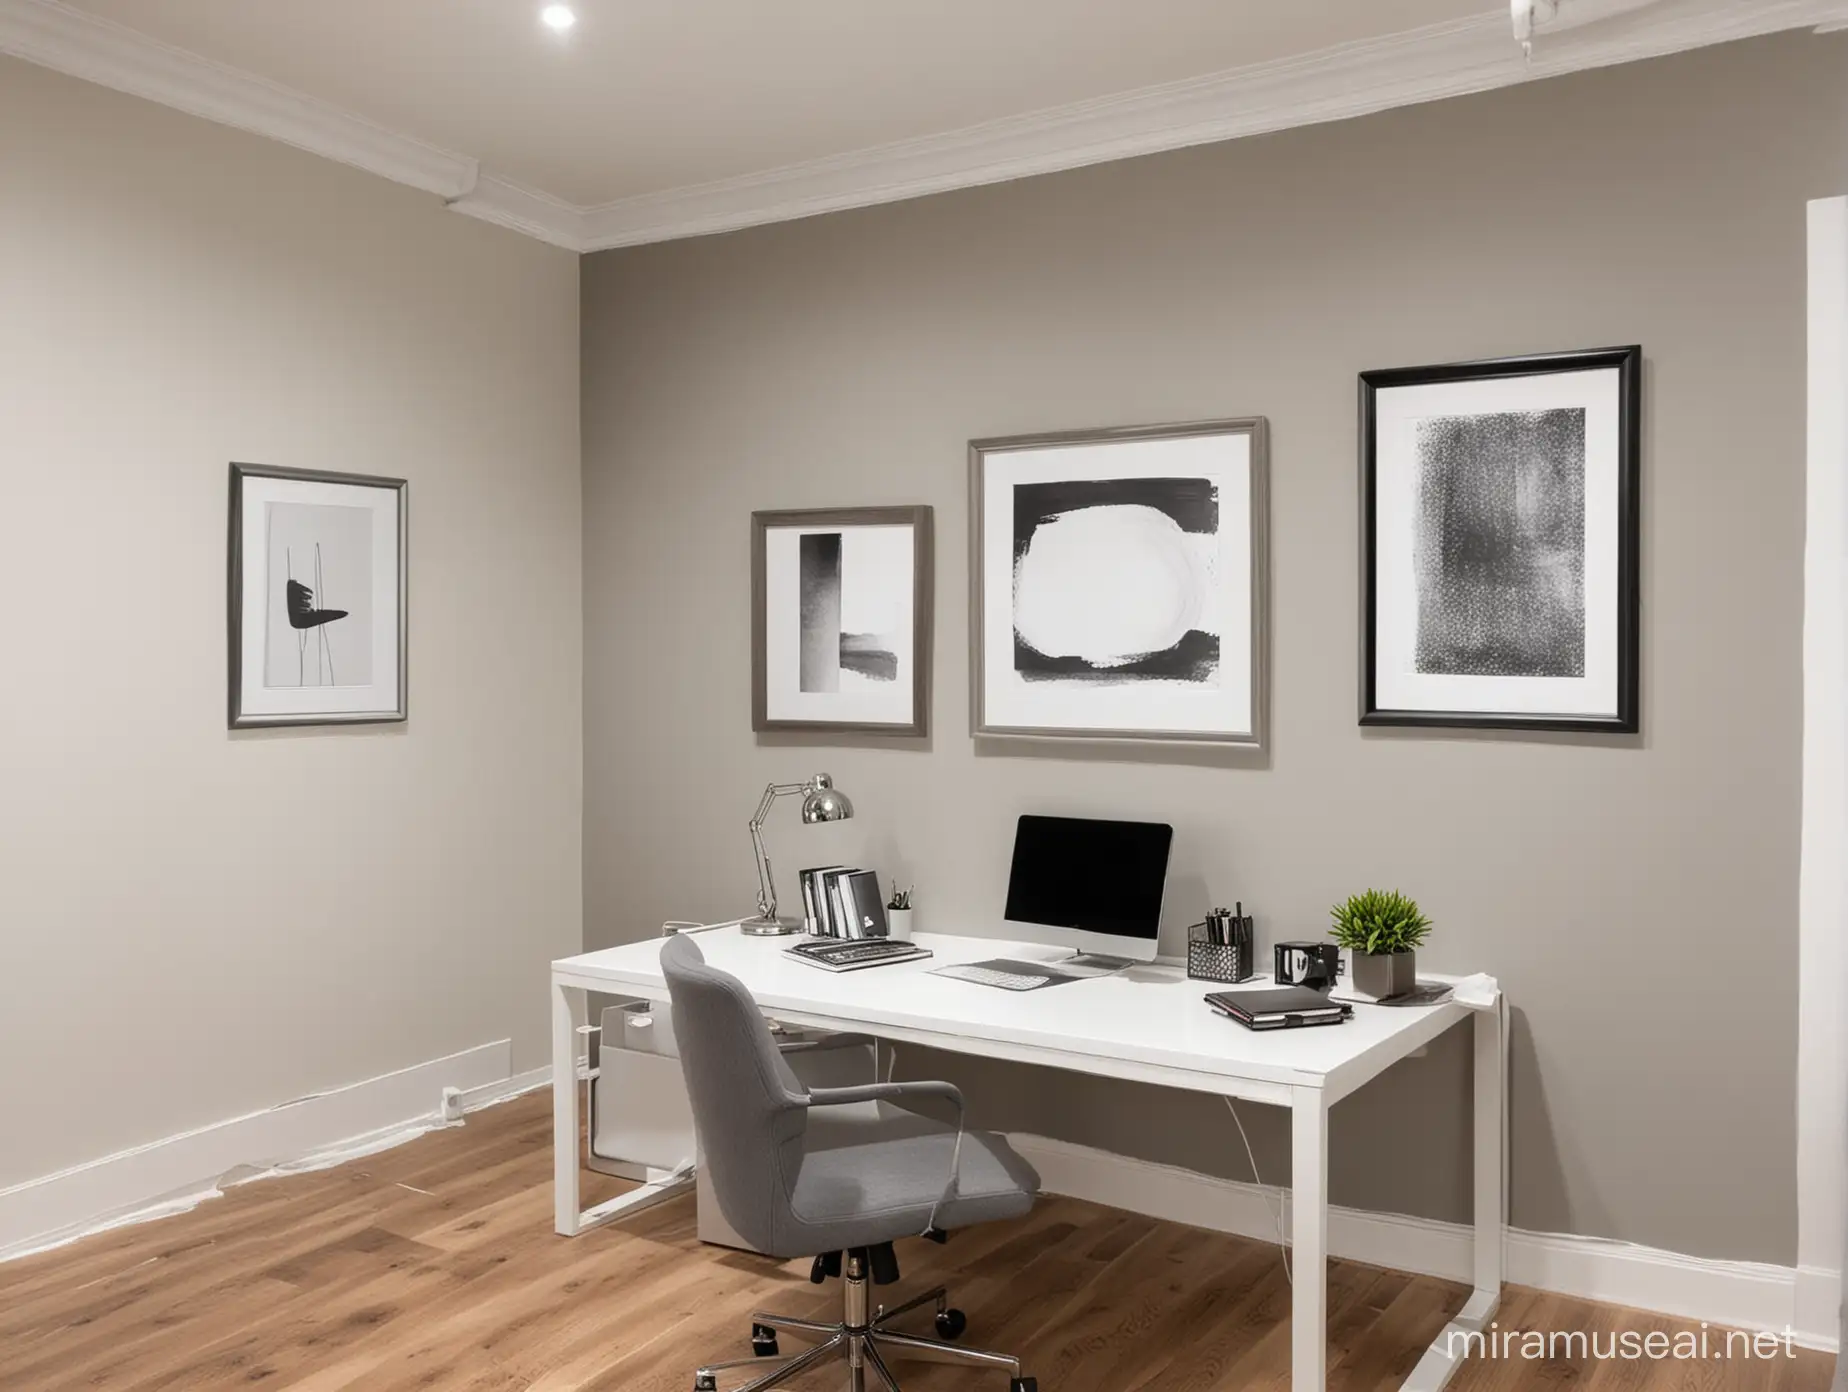 Professional Office Interior with Framed Wall Art